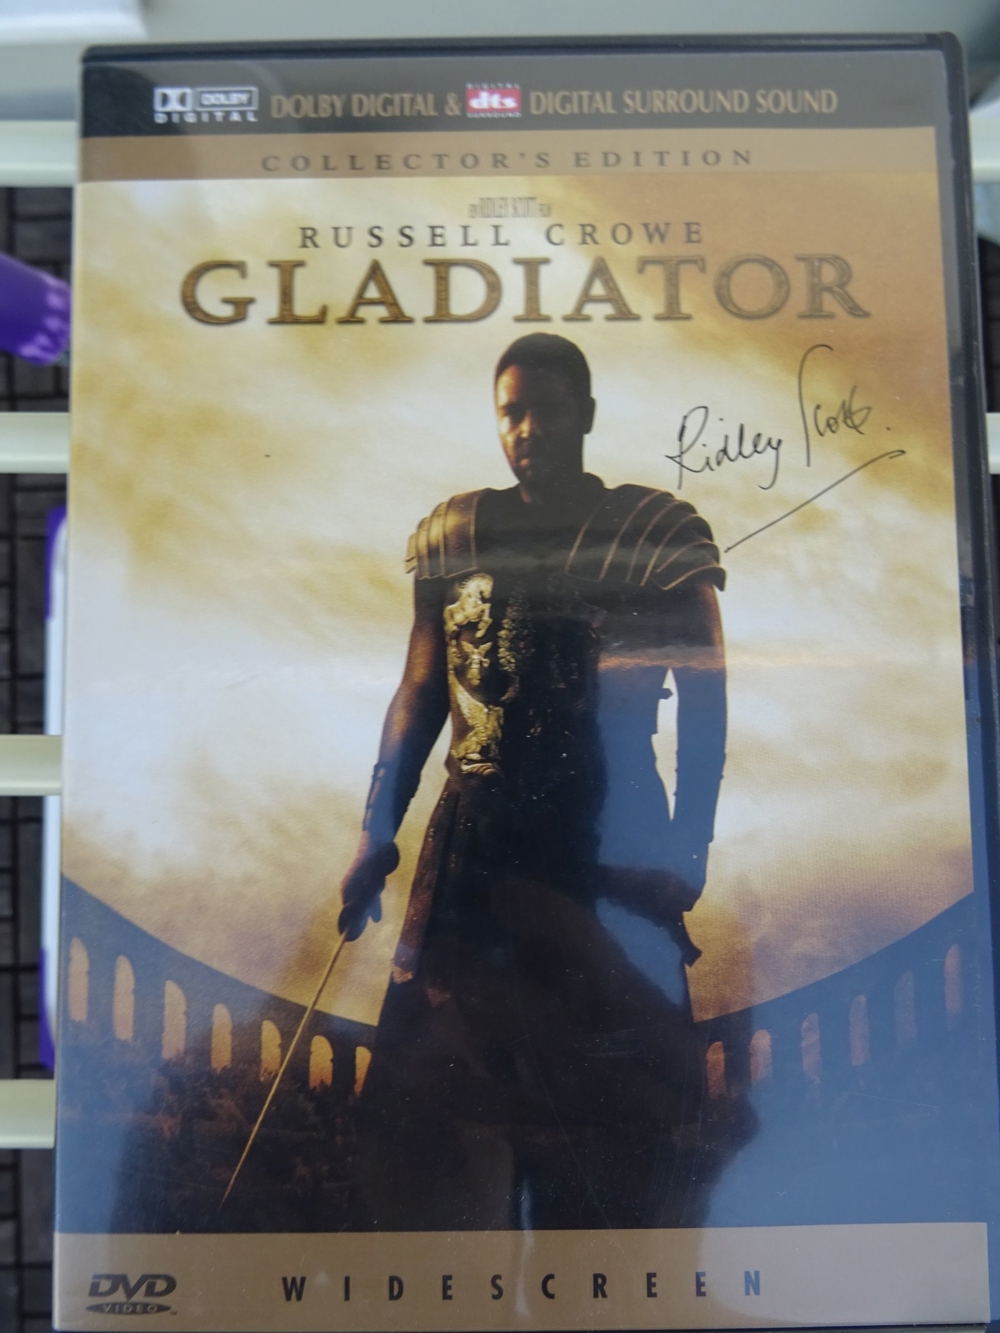 DVD  Gladiator  Ridley Scott, Russel Crowe,Conny Nielson, Oliver Reed